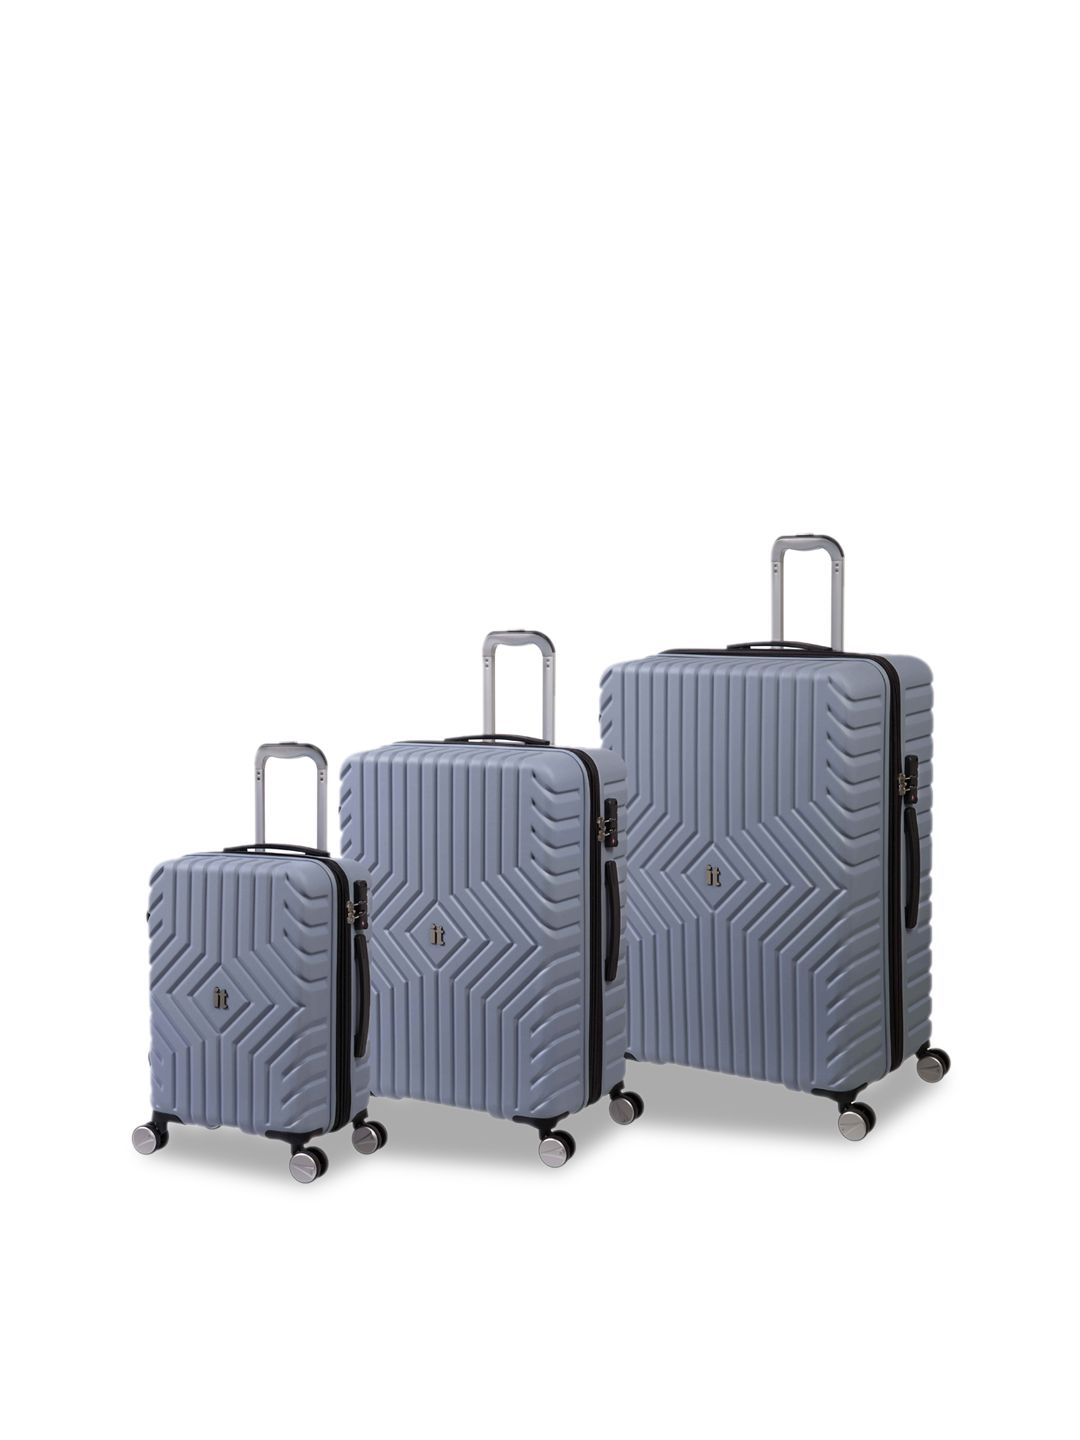 IT Luggage Set Of 3 Blue Solid Hard-Sided Trolley Suitcases Price in India